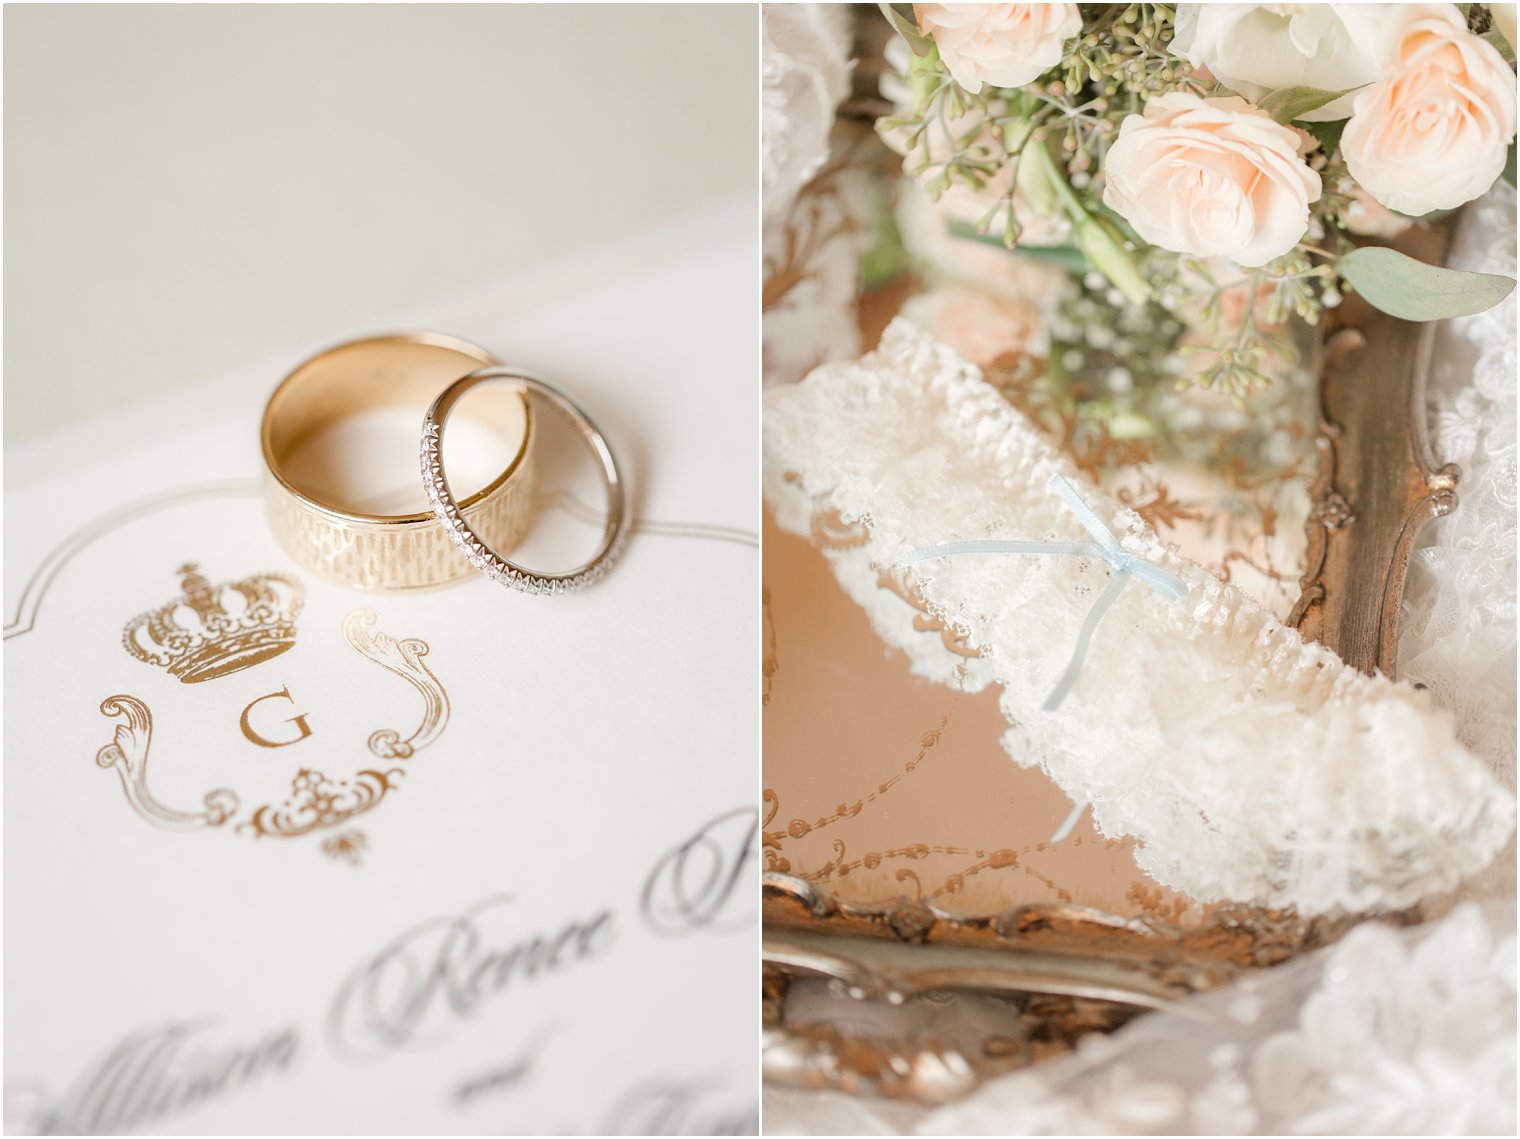 G gold monogram on wedding invitations next to lace garter for Legacy Castle bride photographed by Idalia Photography